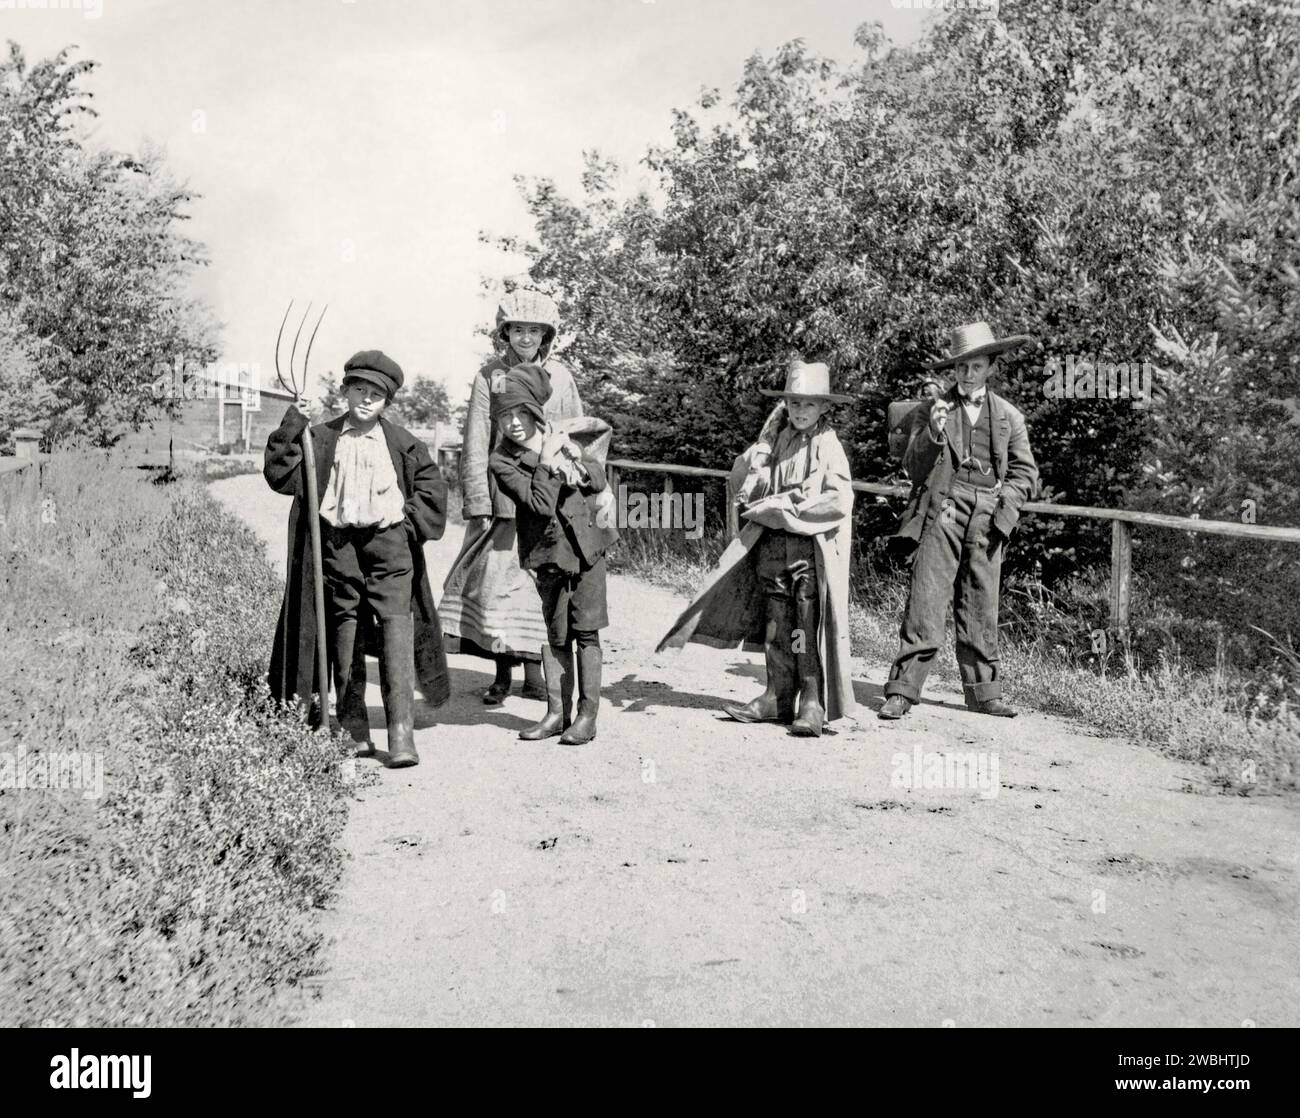 An old photograph of children out ‘tramping’ in the sunshine at Maple Grove Farm, Rosser, Manitoba, Canada in the early part of the 20th century. In the rural setting the four boys and a taller girl are having fun posing, dressed up wearing oversized, adult clothes and hats. The girl wears an upturned basket on her head. One boy carries a pitchfork. This is taken from an early photograph album – this photo was captioned as ‘Amateur Tramps’. Stock Photo